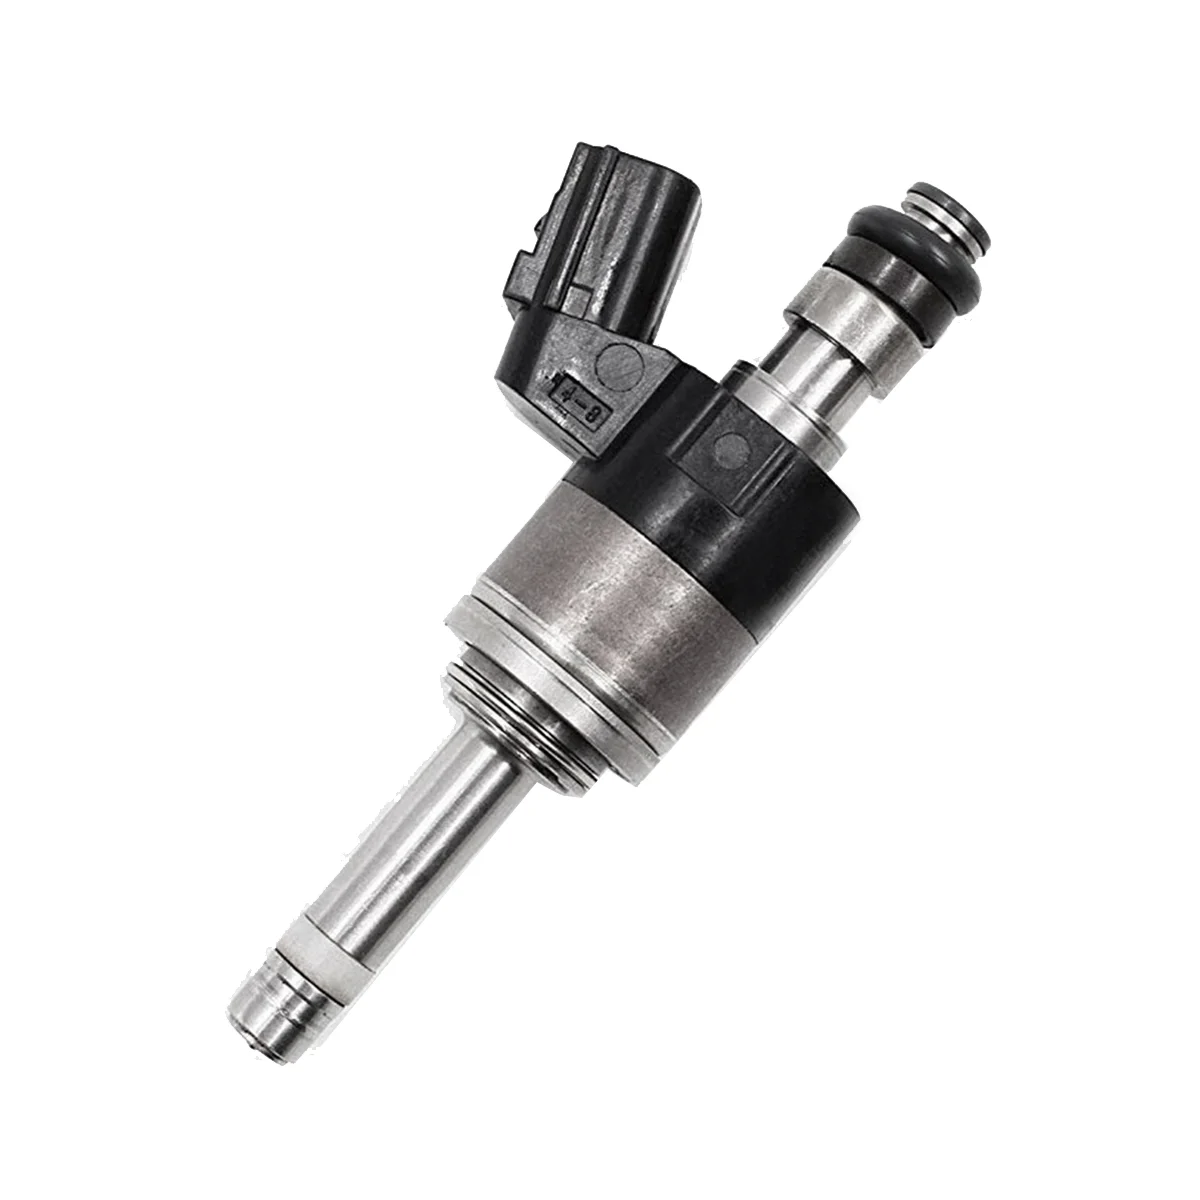 

Fuel Supply Injector for Honda Fit 1.5L 2015-2019 Replacement 16010-5R1-315 16010-5R1-305 16010 5R1 315 160105R1315